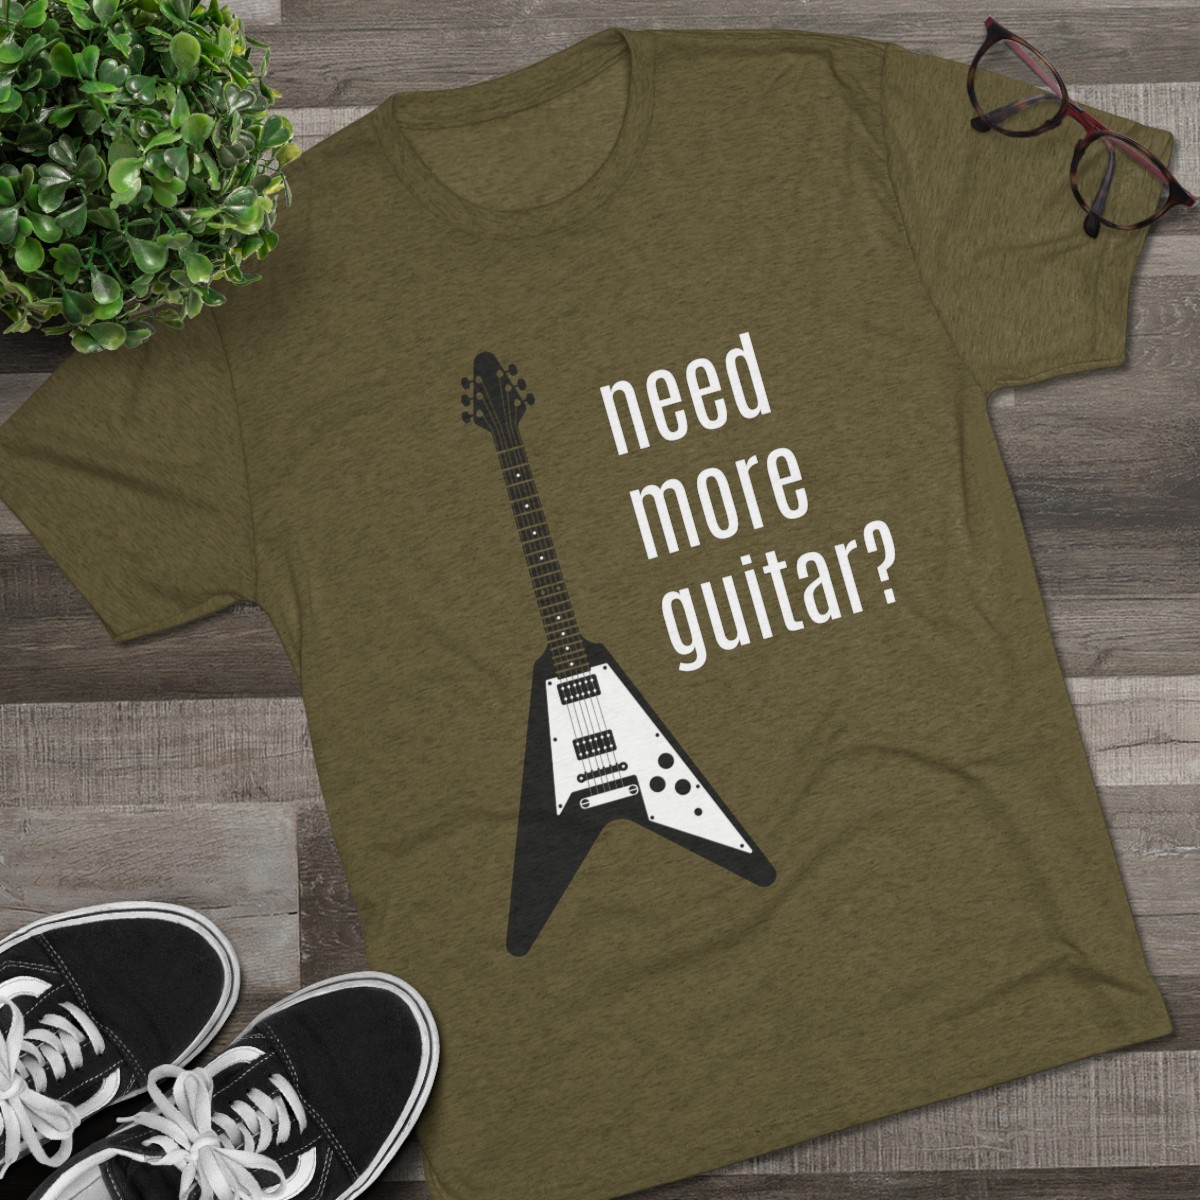 THE ZOO Tri-Blend Crew Tee "need more guitar?" product main image